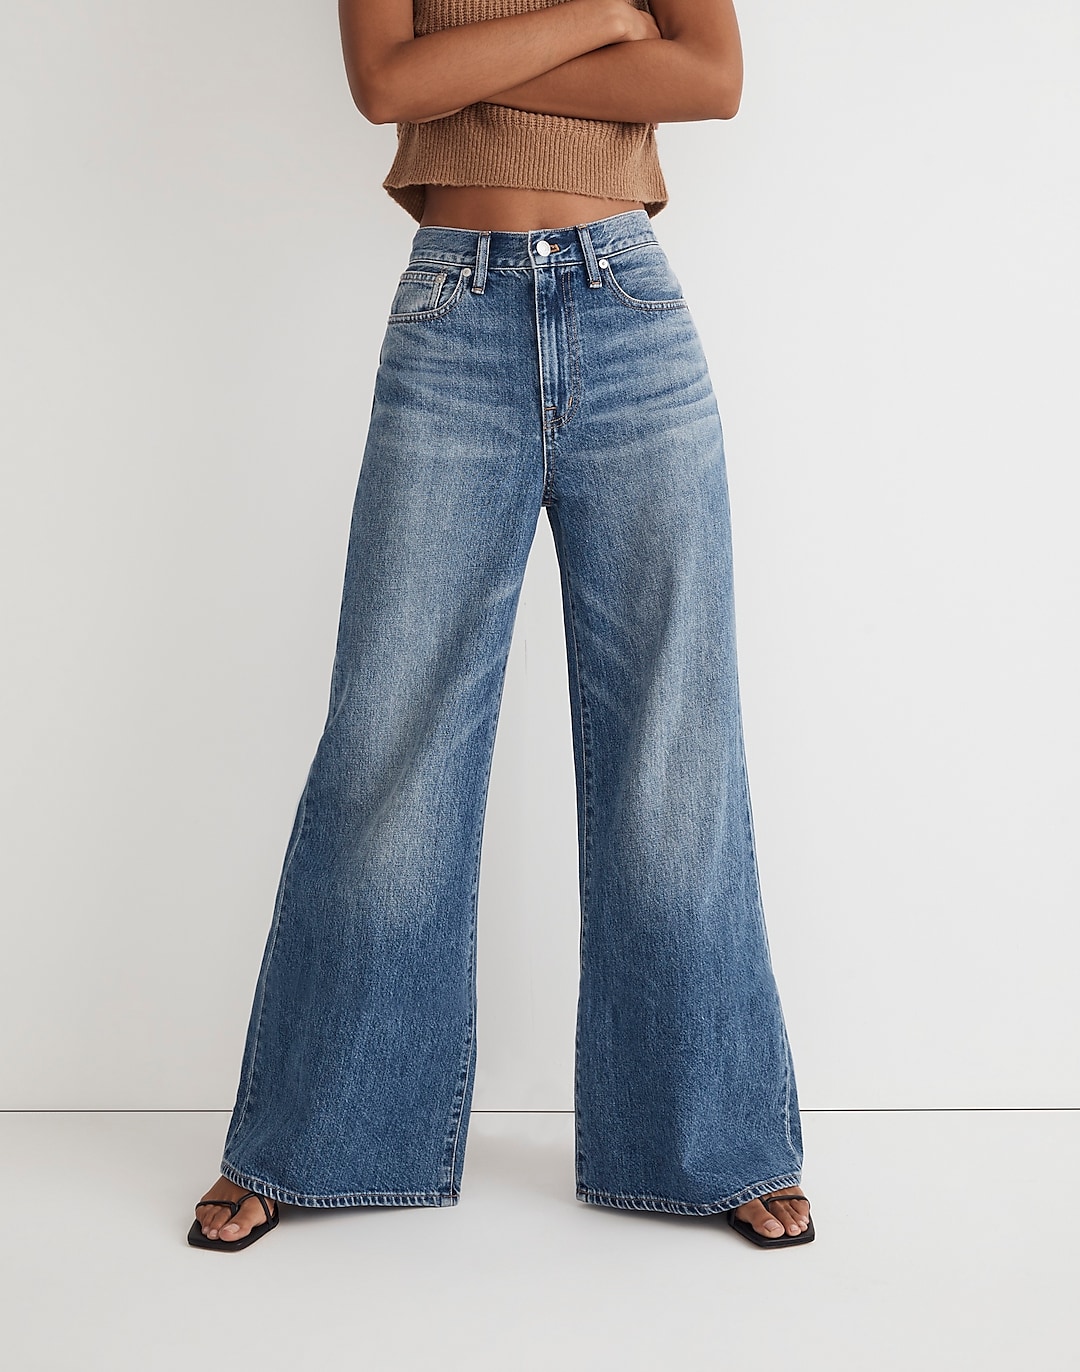 Extrawide-Leg Jeans in Montauk Wash | Madewell